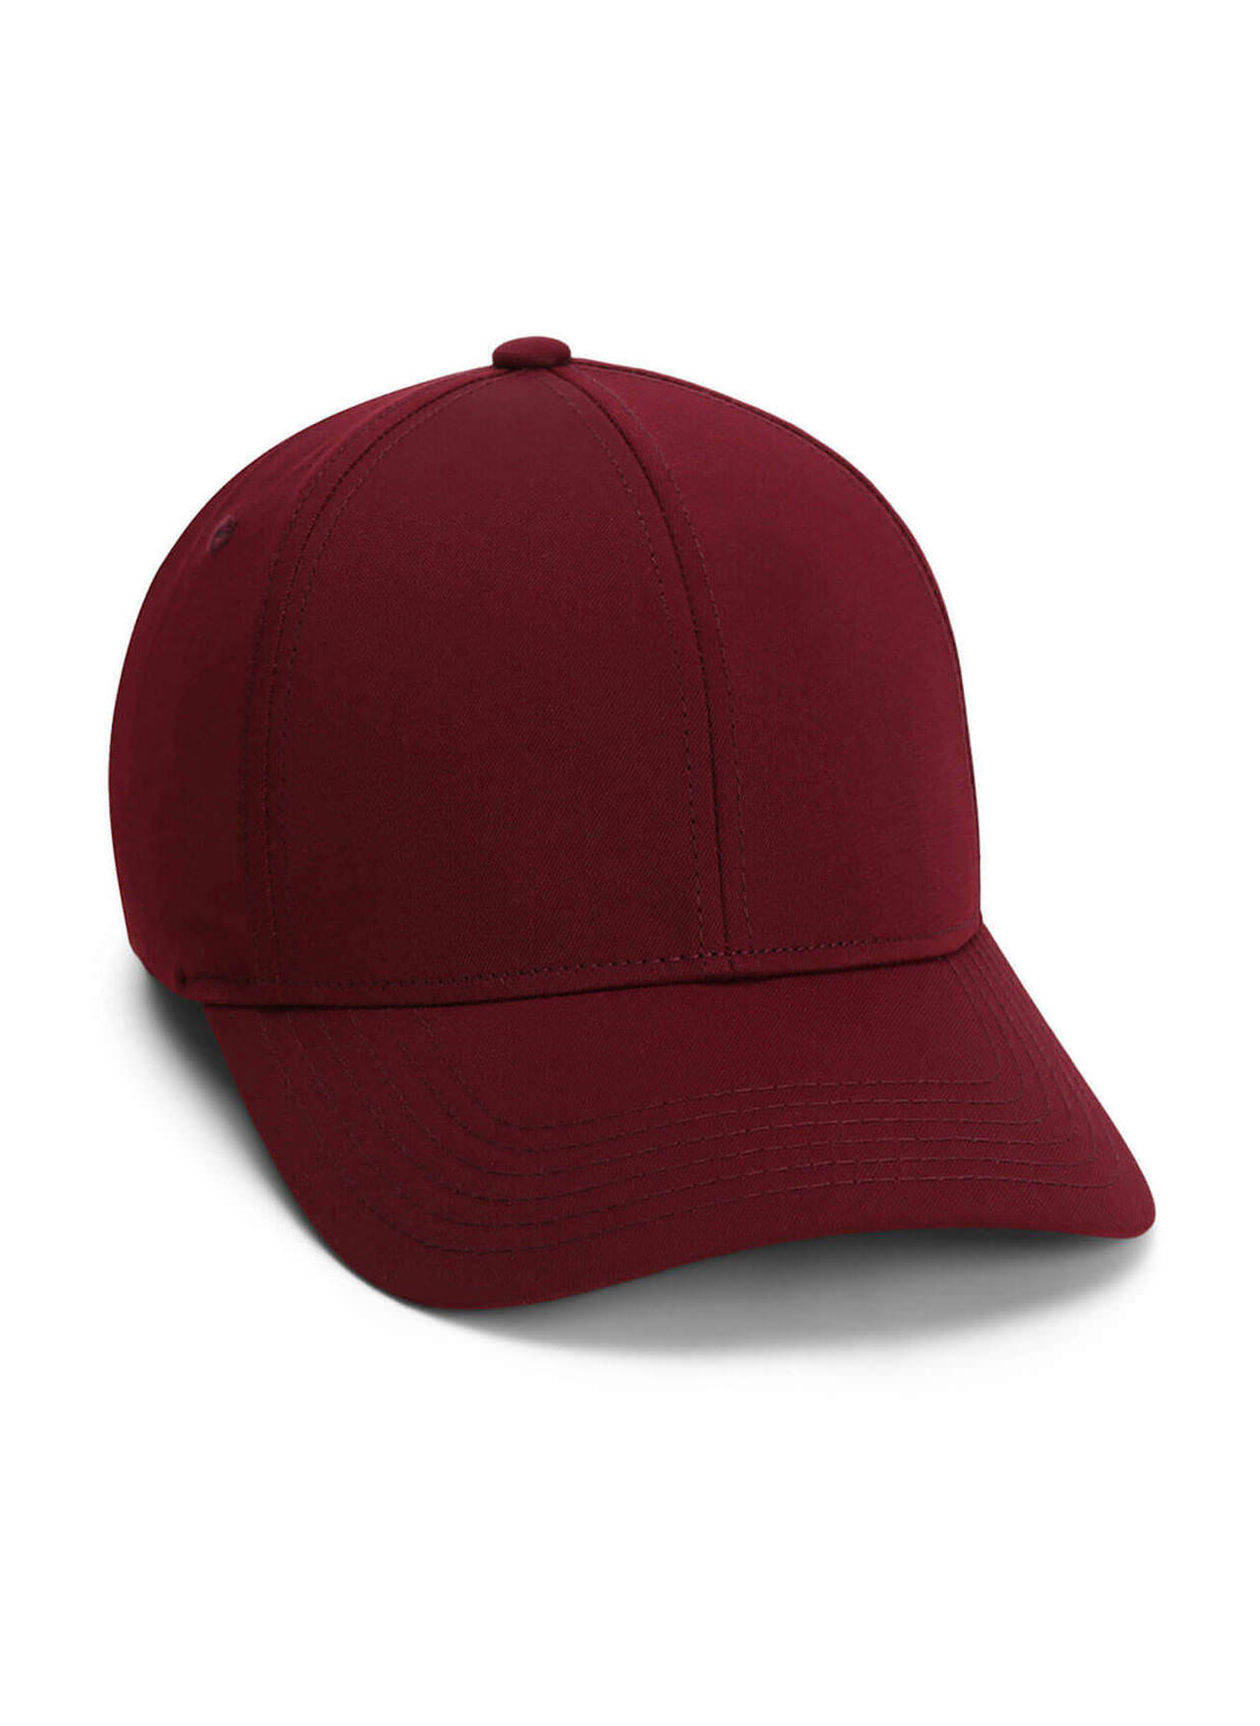 Imperial Bordeaux The Whitaker Soft Washed Poly Hat